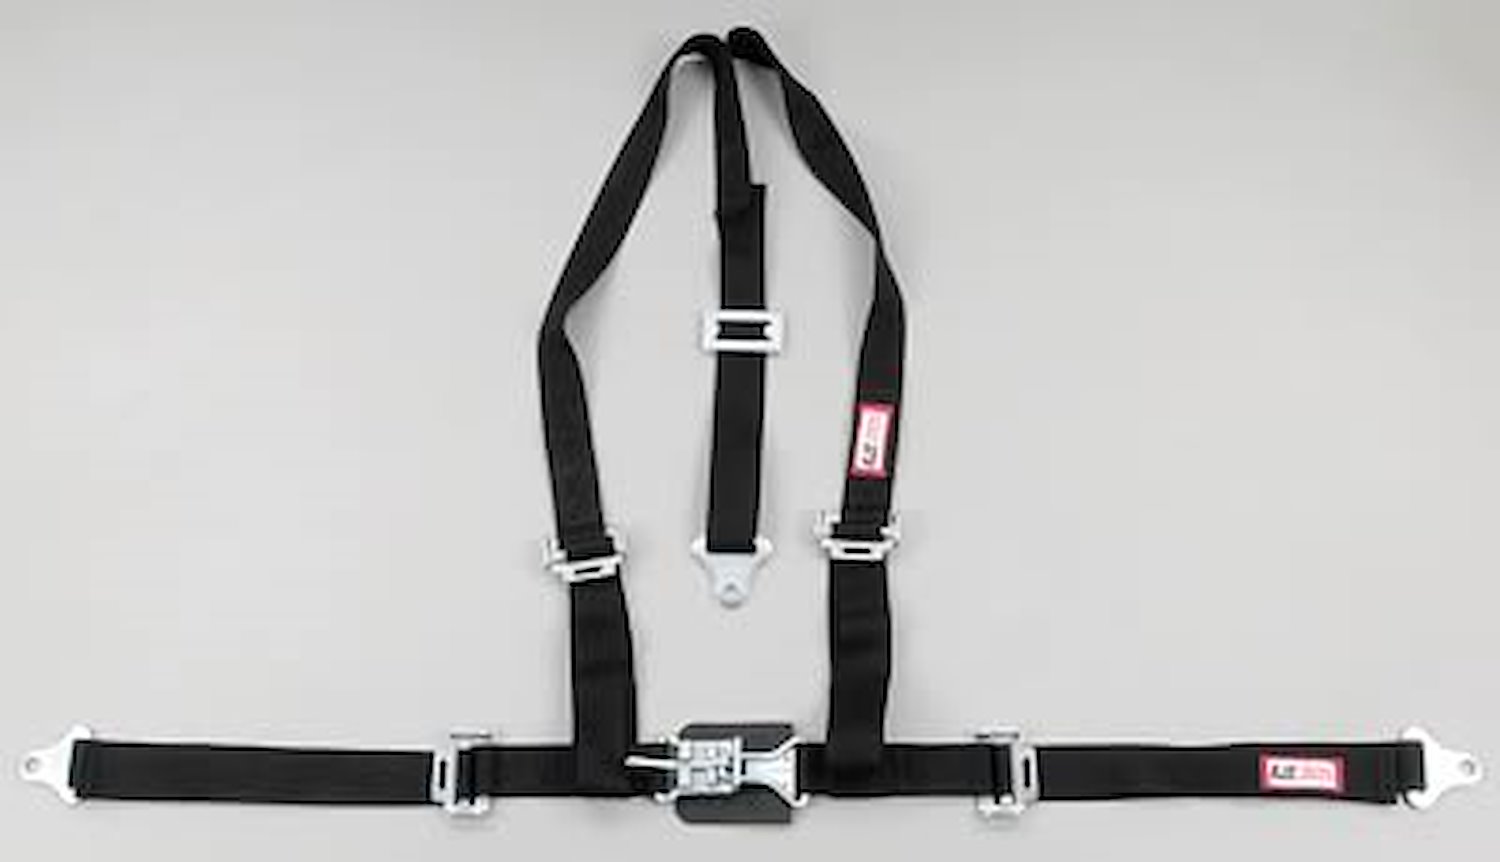 NON-SFI L&L HARNESS 3 PULL UP Lap BELT SNAP SEWN IN 2 S.H. Y FLOOR Mount w/STERNUM STRAP WRAP/SNAP BLUE